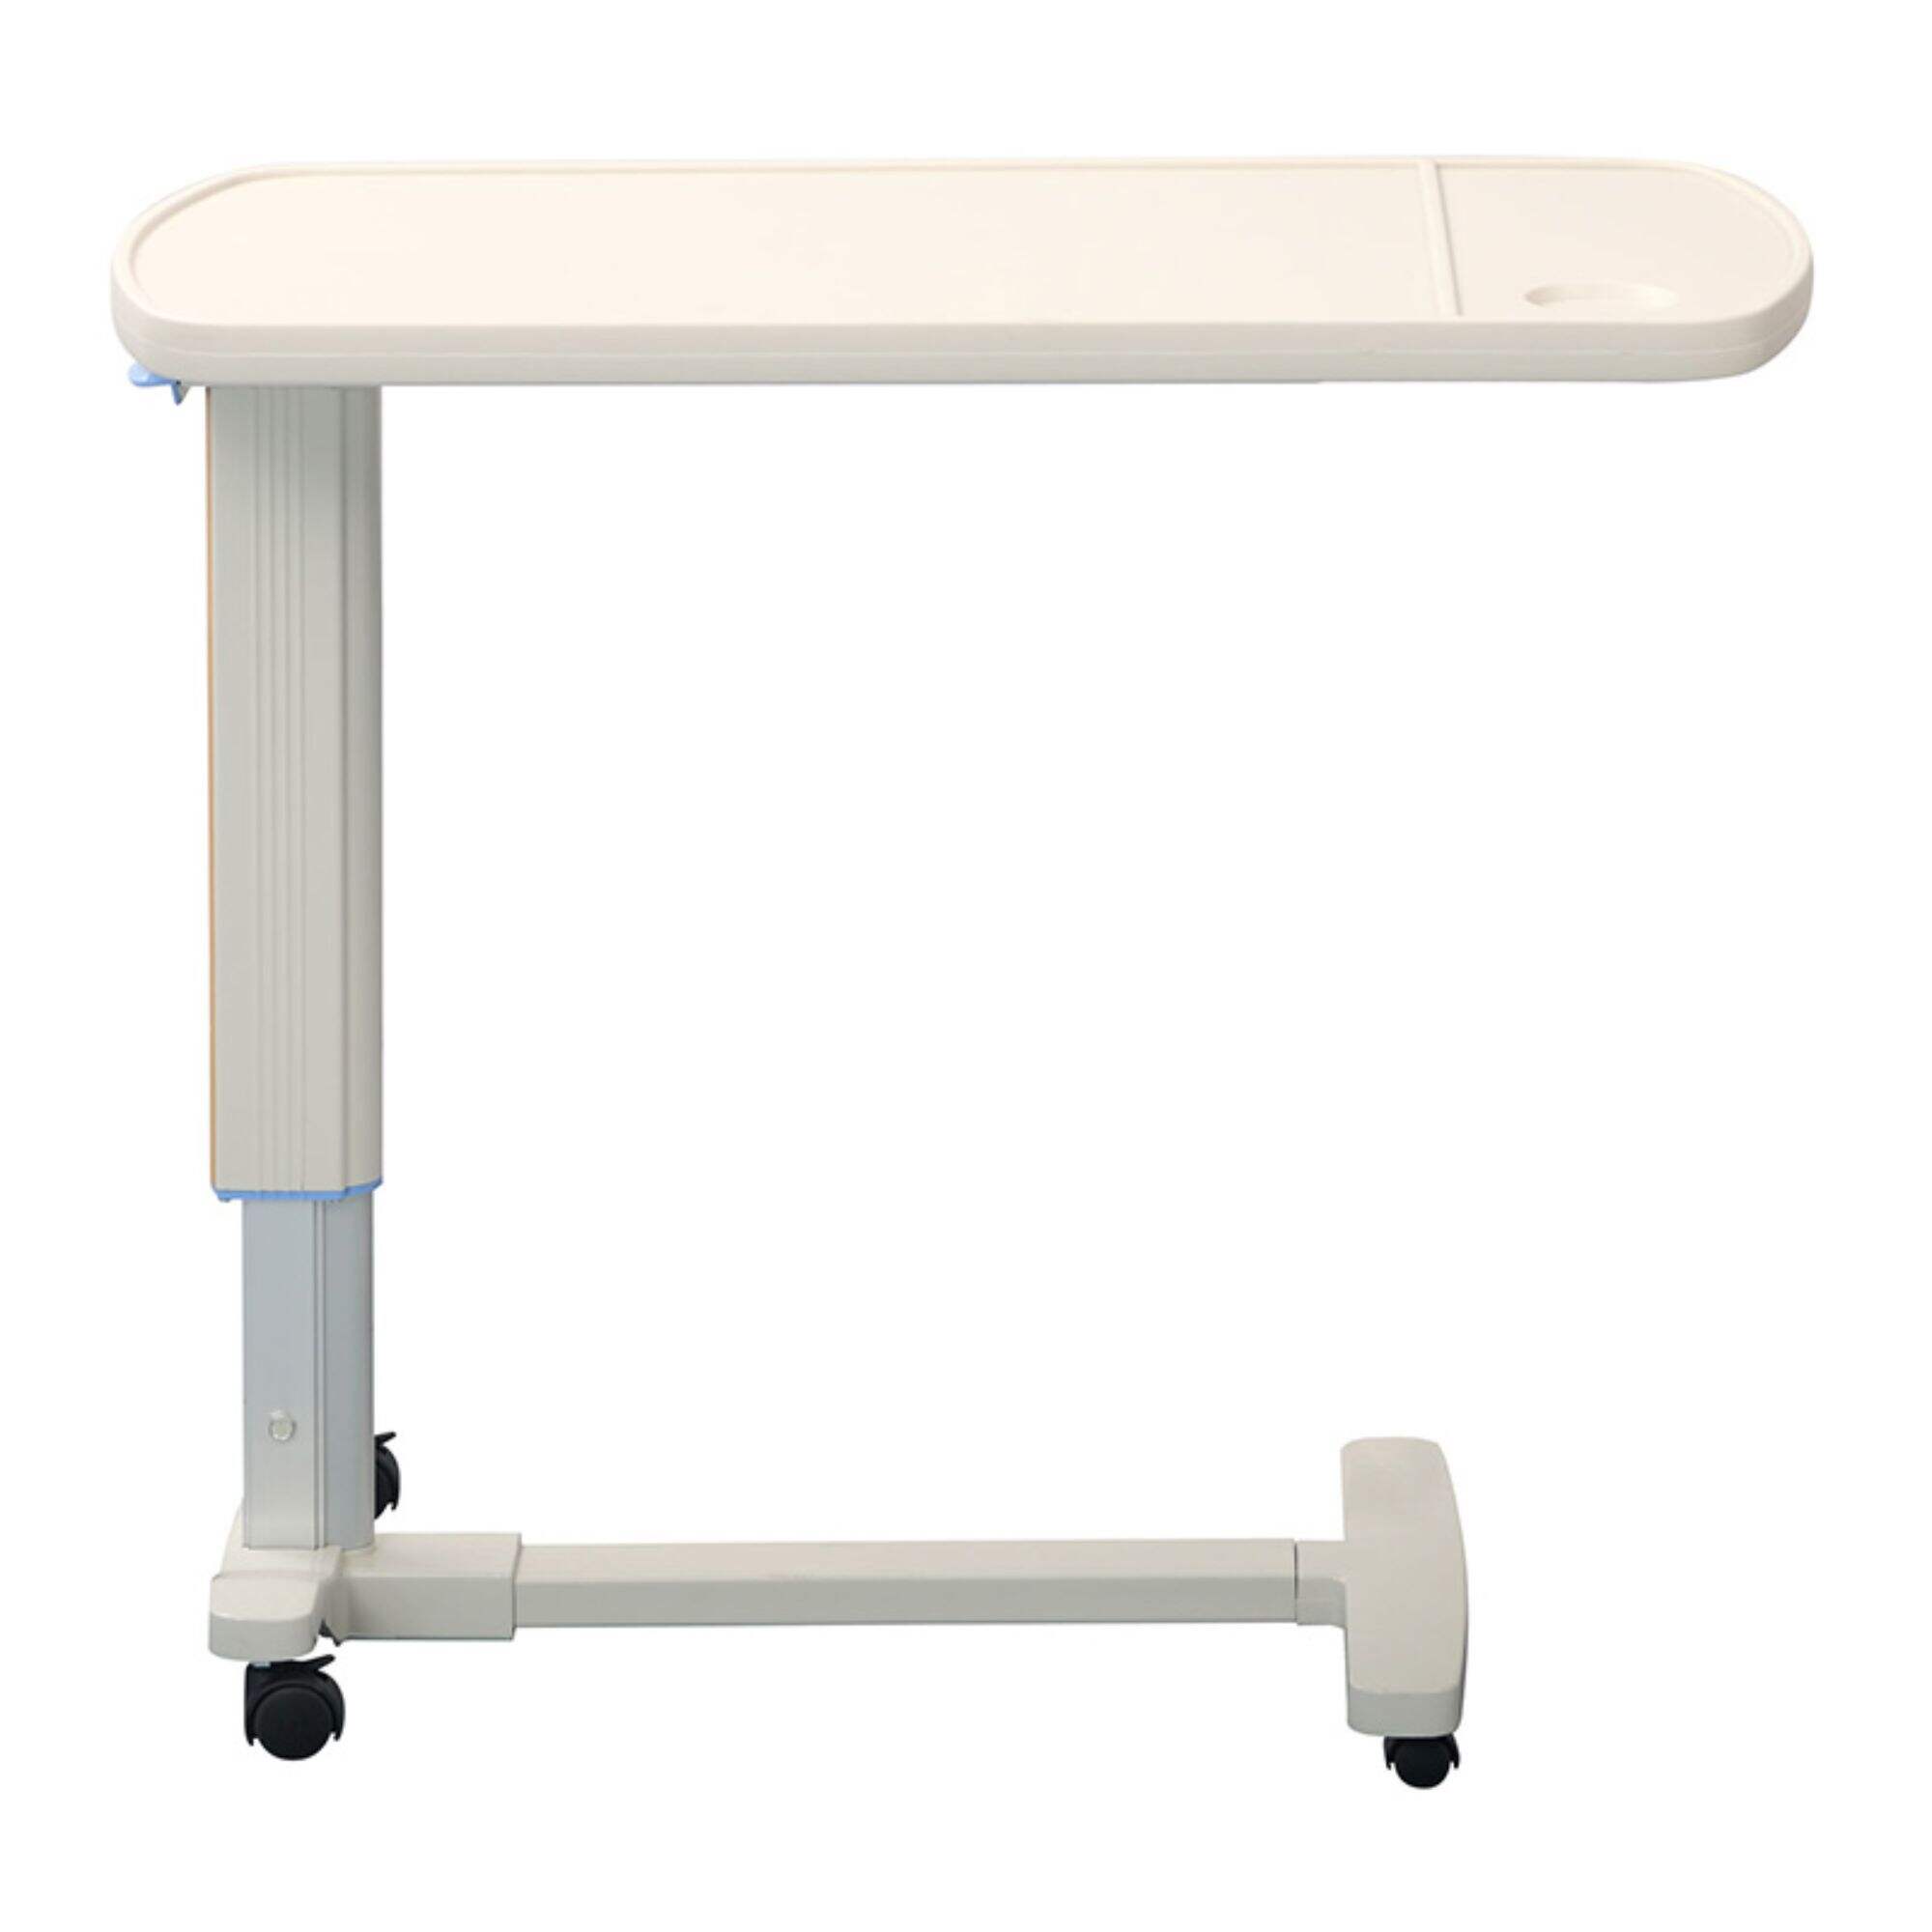 YFT003 Overbed Table